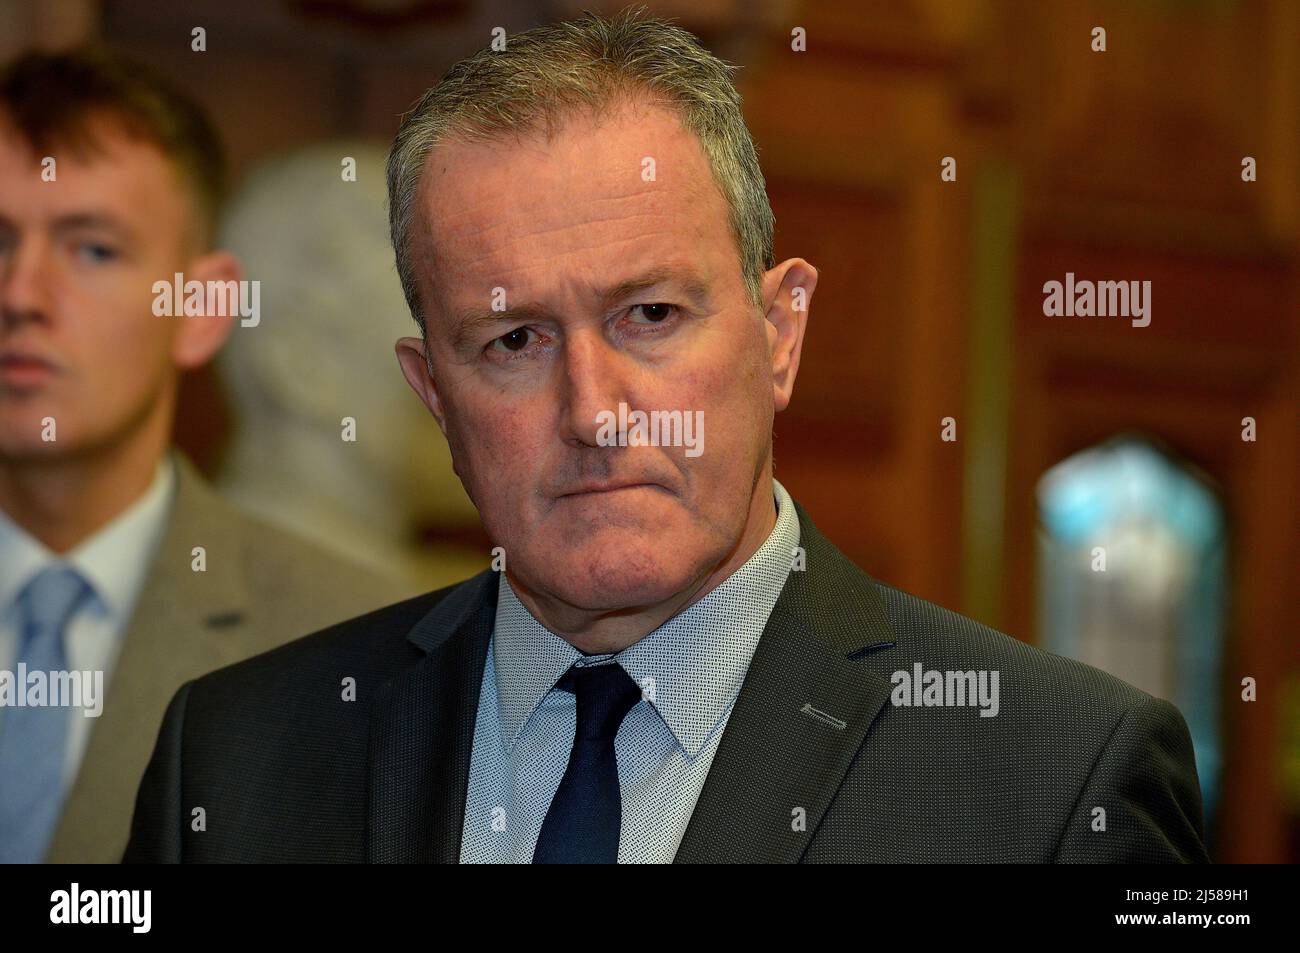 Conor Murphy is an Irish republican Sinn Féin politician who is the Member of the Legislative Assembly of Northern Ireland for Newry and Armagh. He served as the Member of Parliament for Newry and Armagh from 2005 until 2015. ©George Sweeney / Alamy Stock Photo Stock Photo